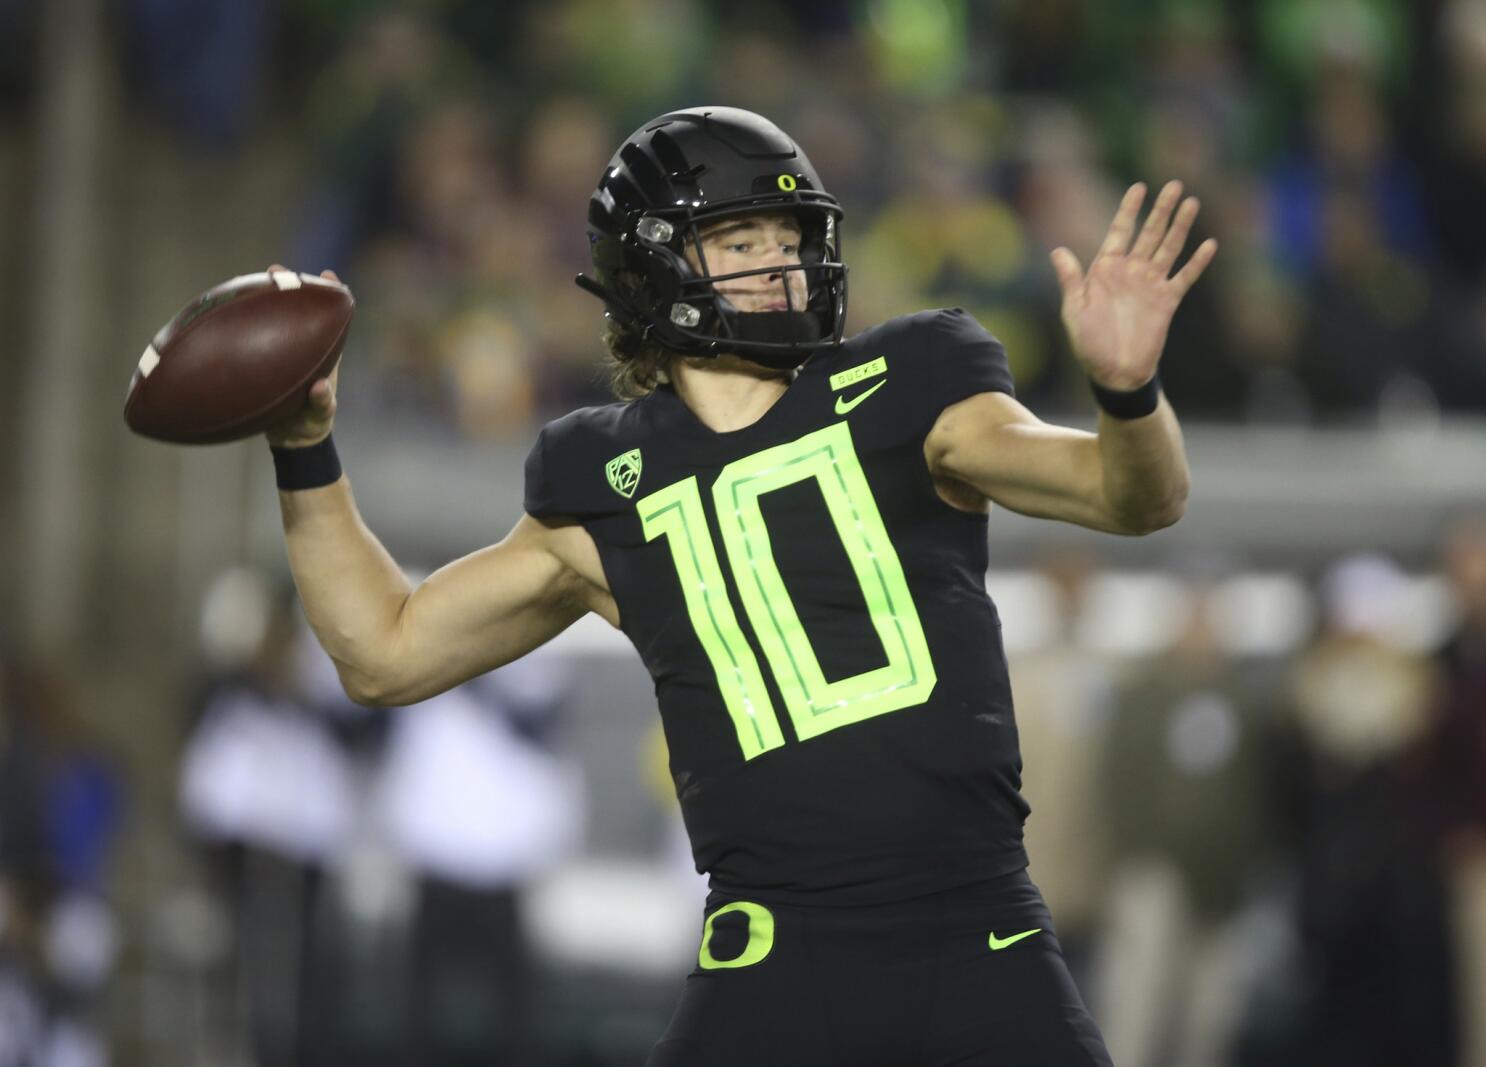 Is Oregon QB Justin Herbert the right fit for Chargers? - Los